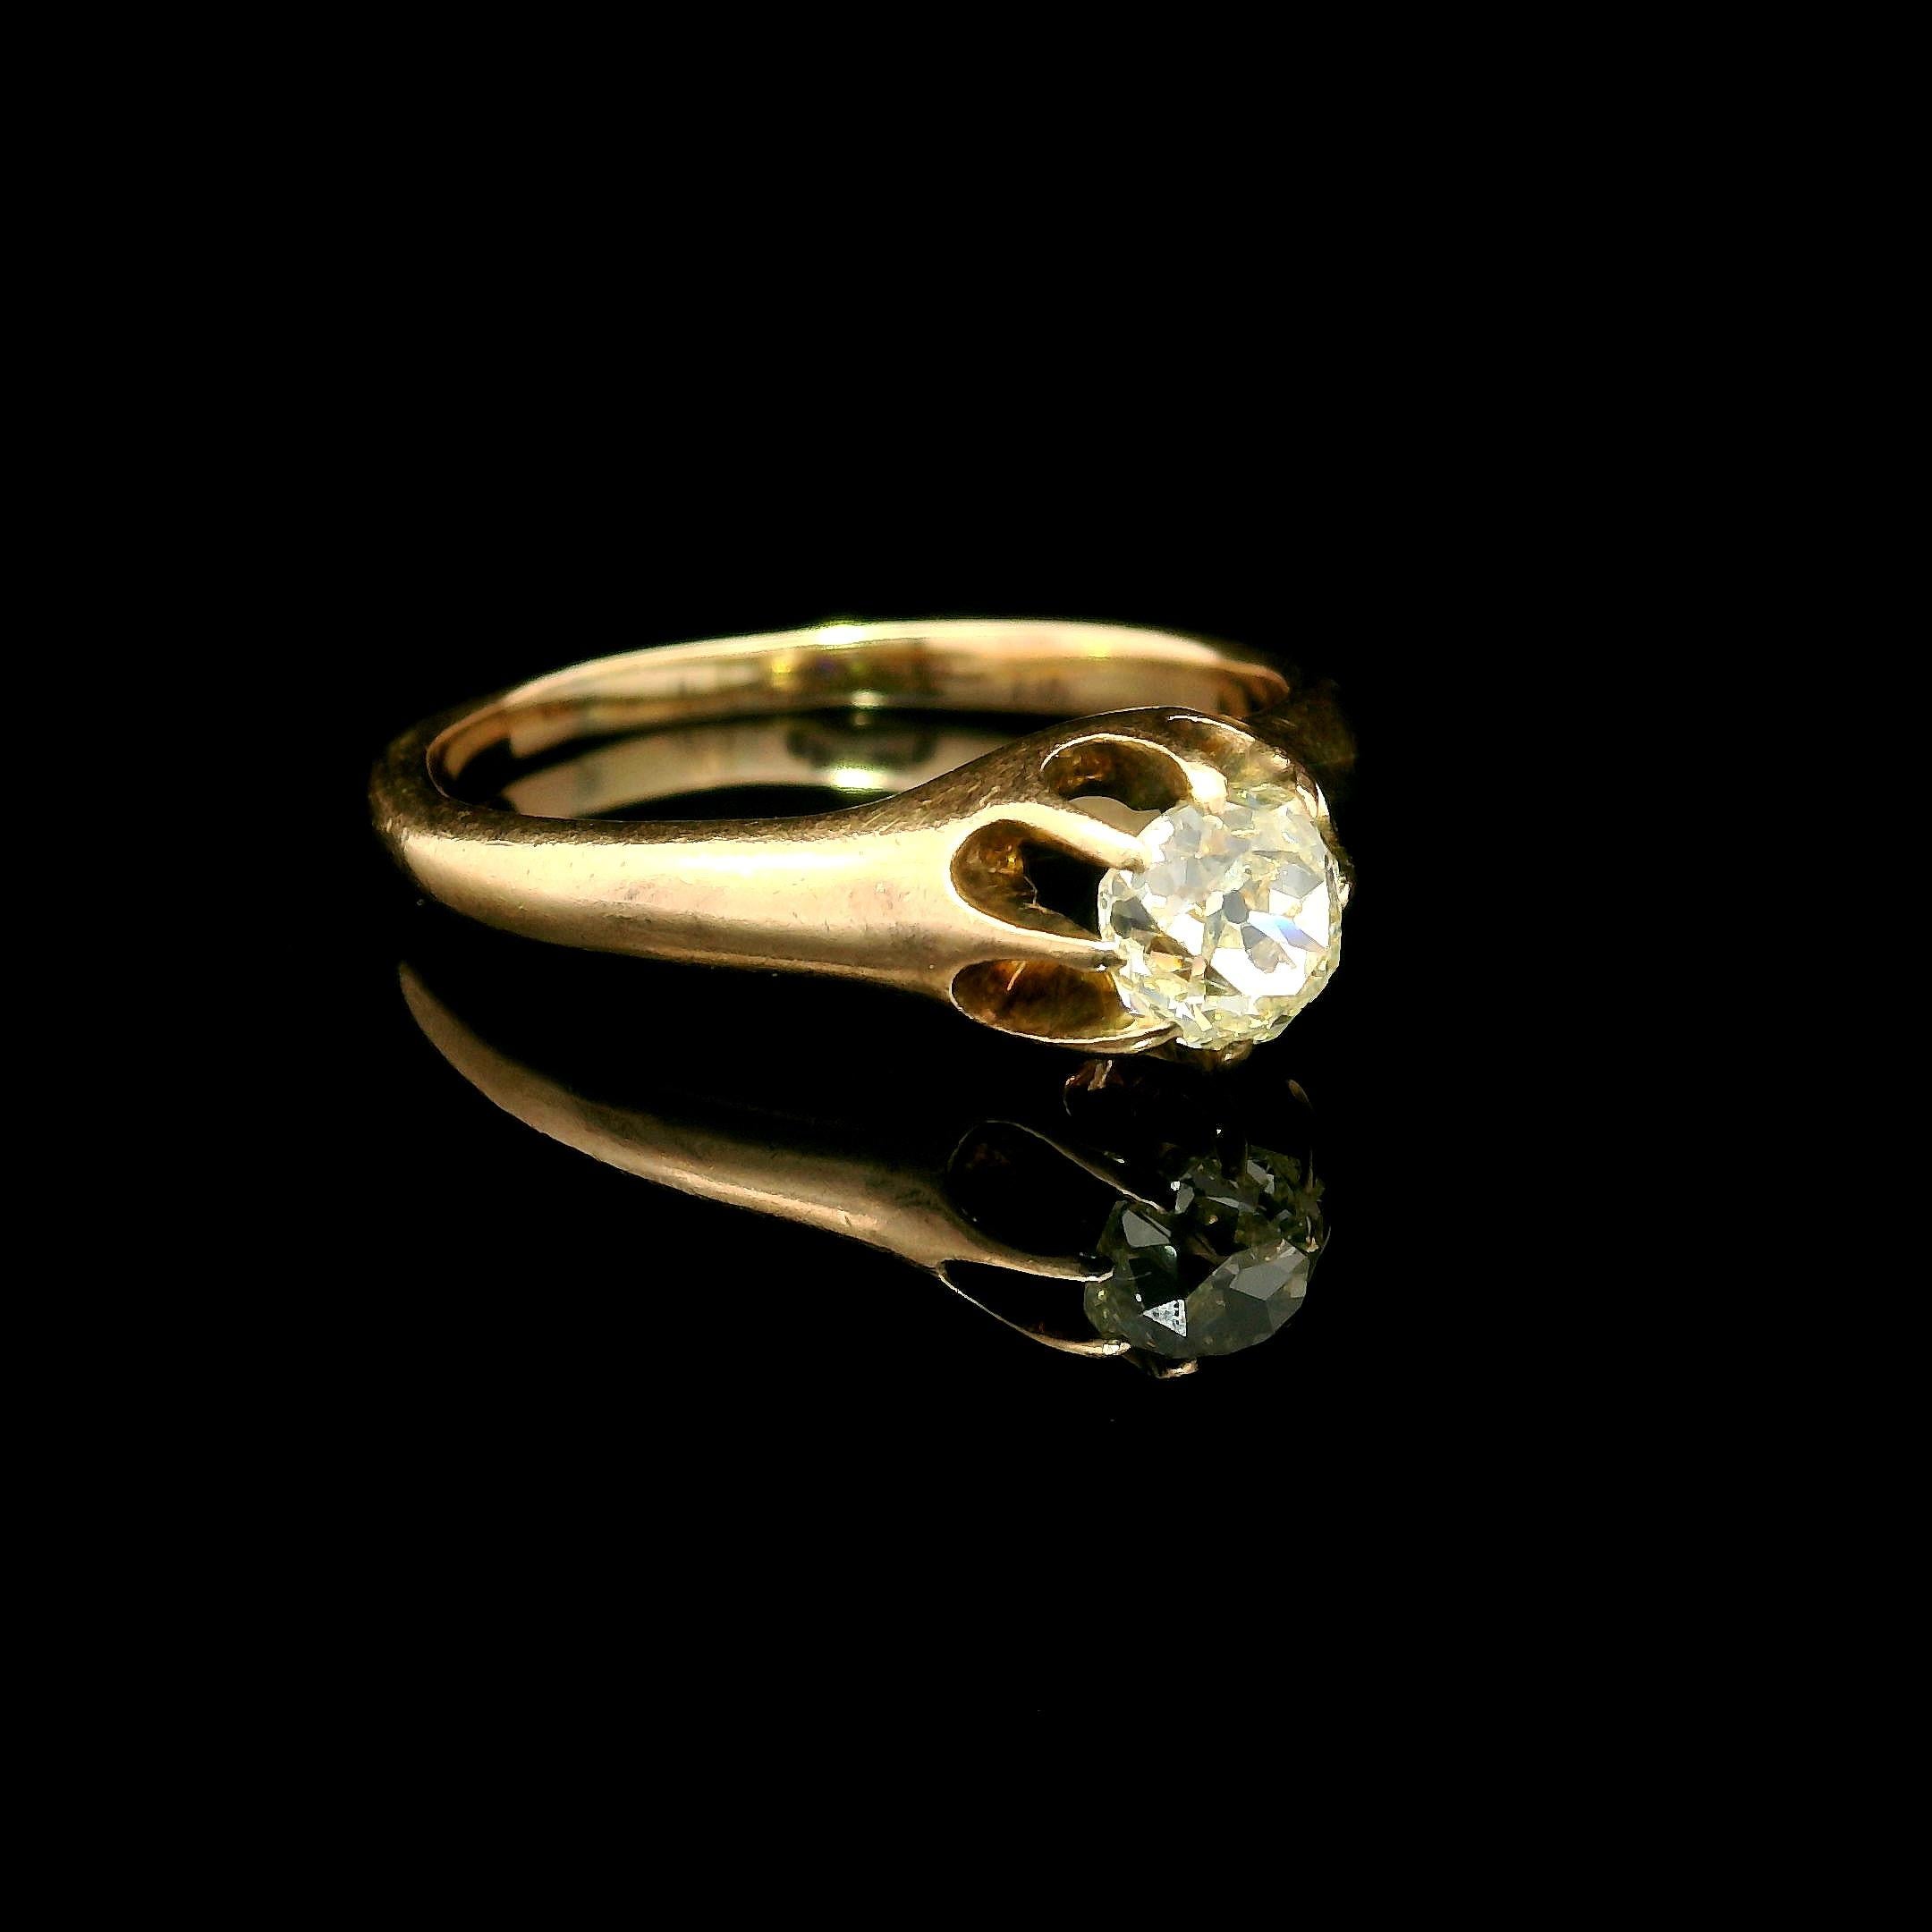 Antique Victorian 10k Yellow Gold 0.52ctw Old Mine Cut Diamond Solitaire Ring In Excellent Condition For Sale In Montclair, NJ